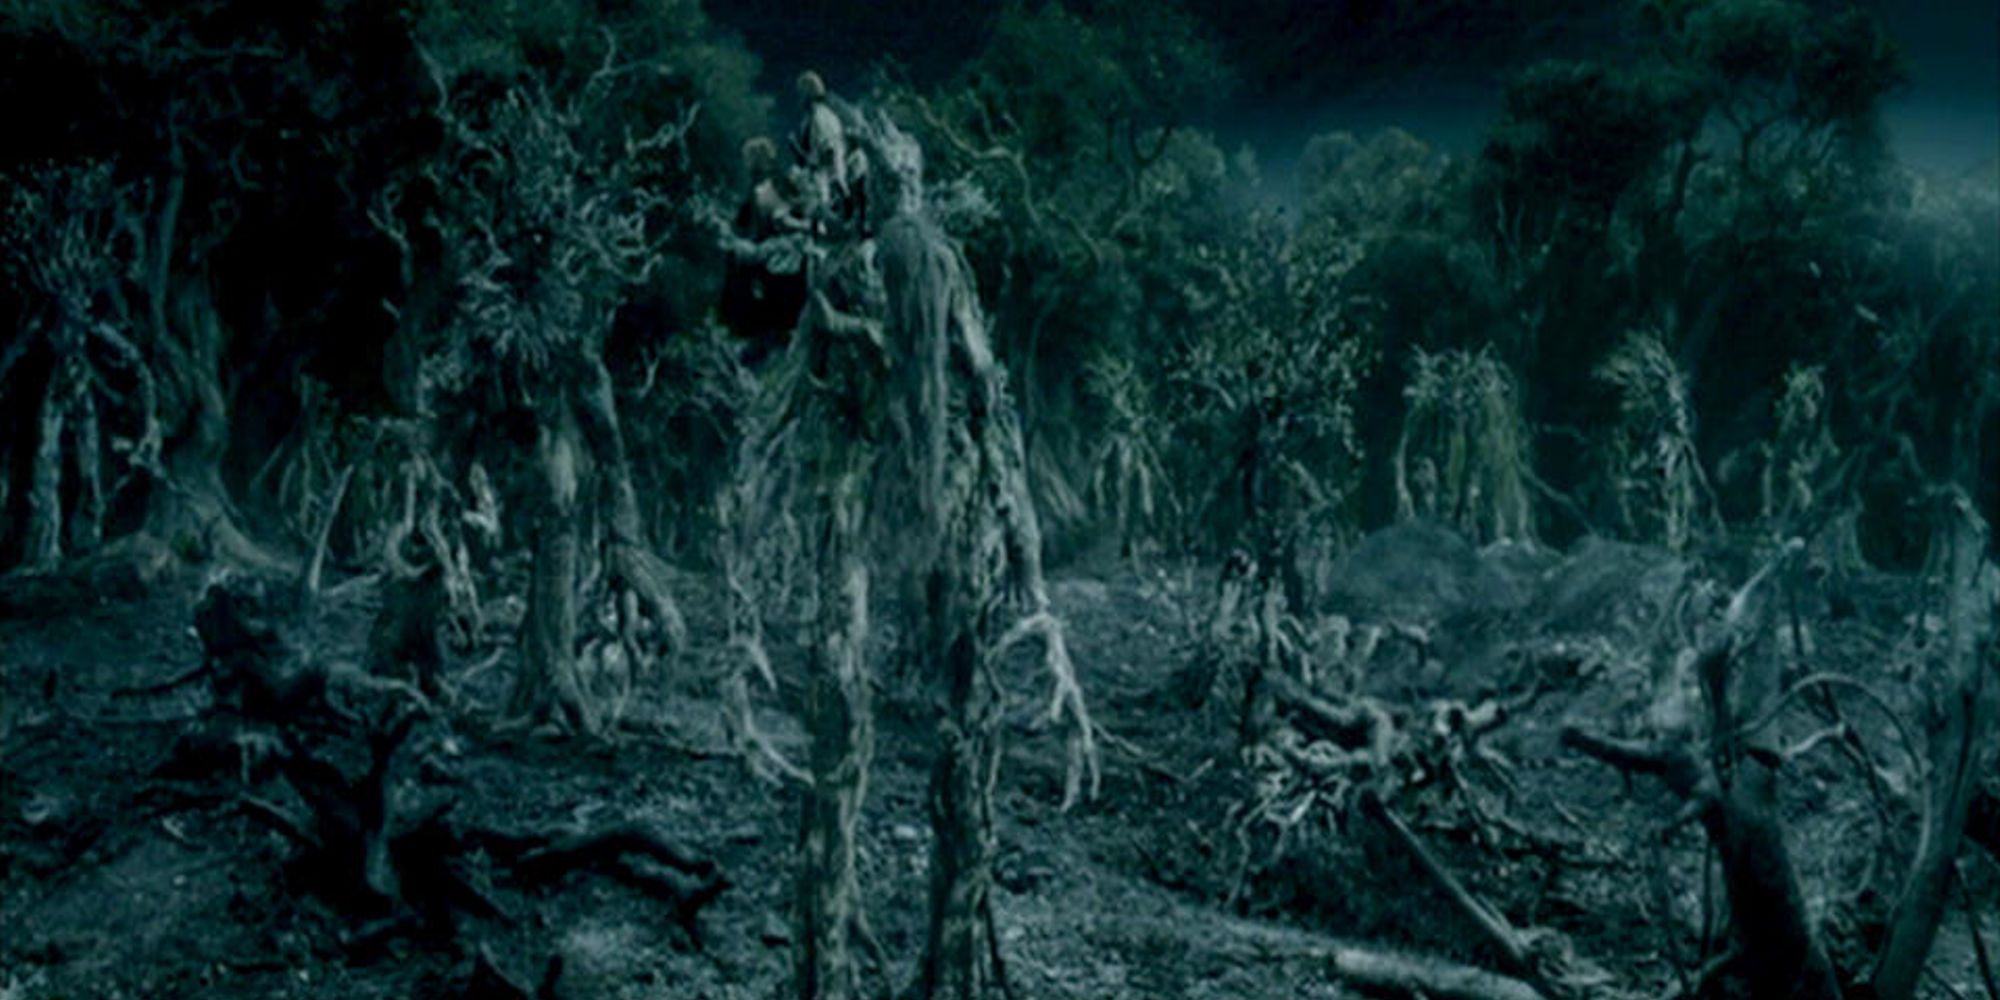 Treebeard and the other ents begin to march on Isengard. Merry and Pippin sit on his shoulder